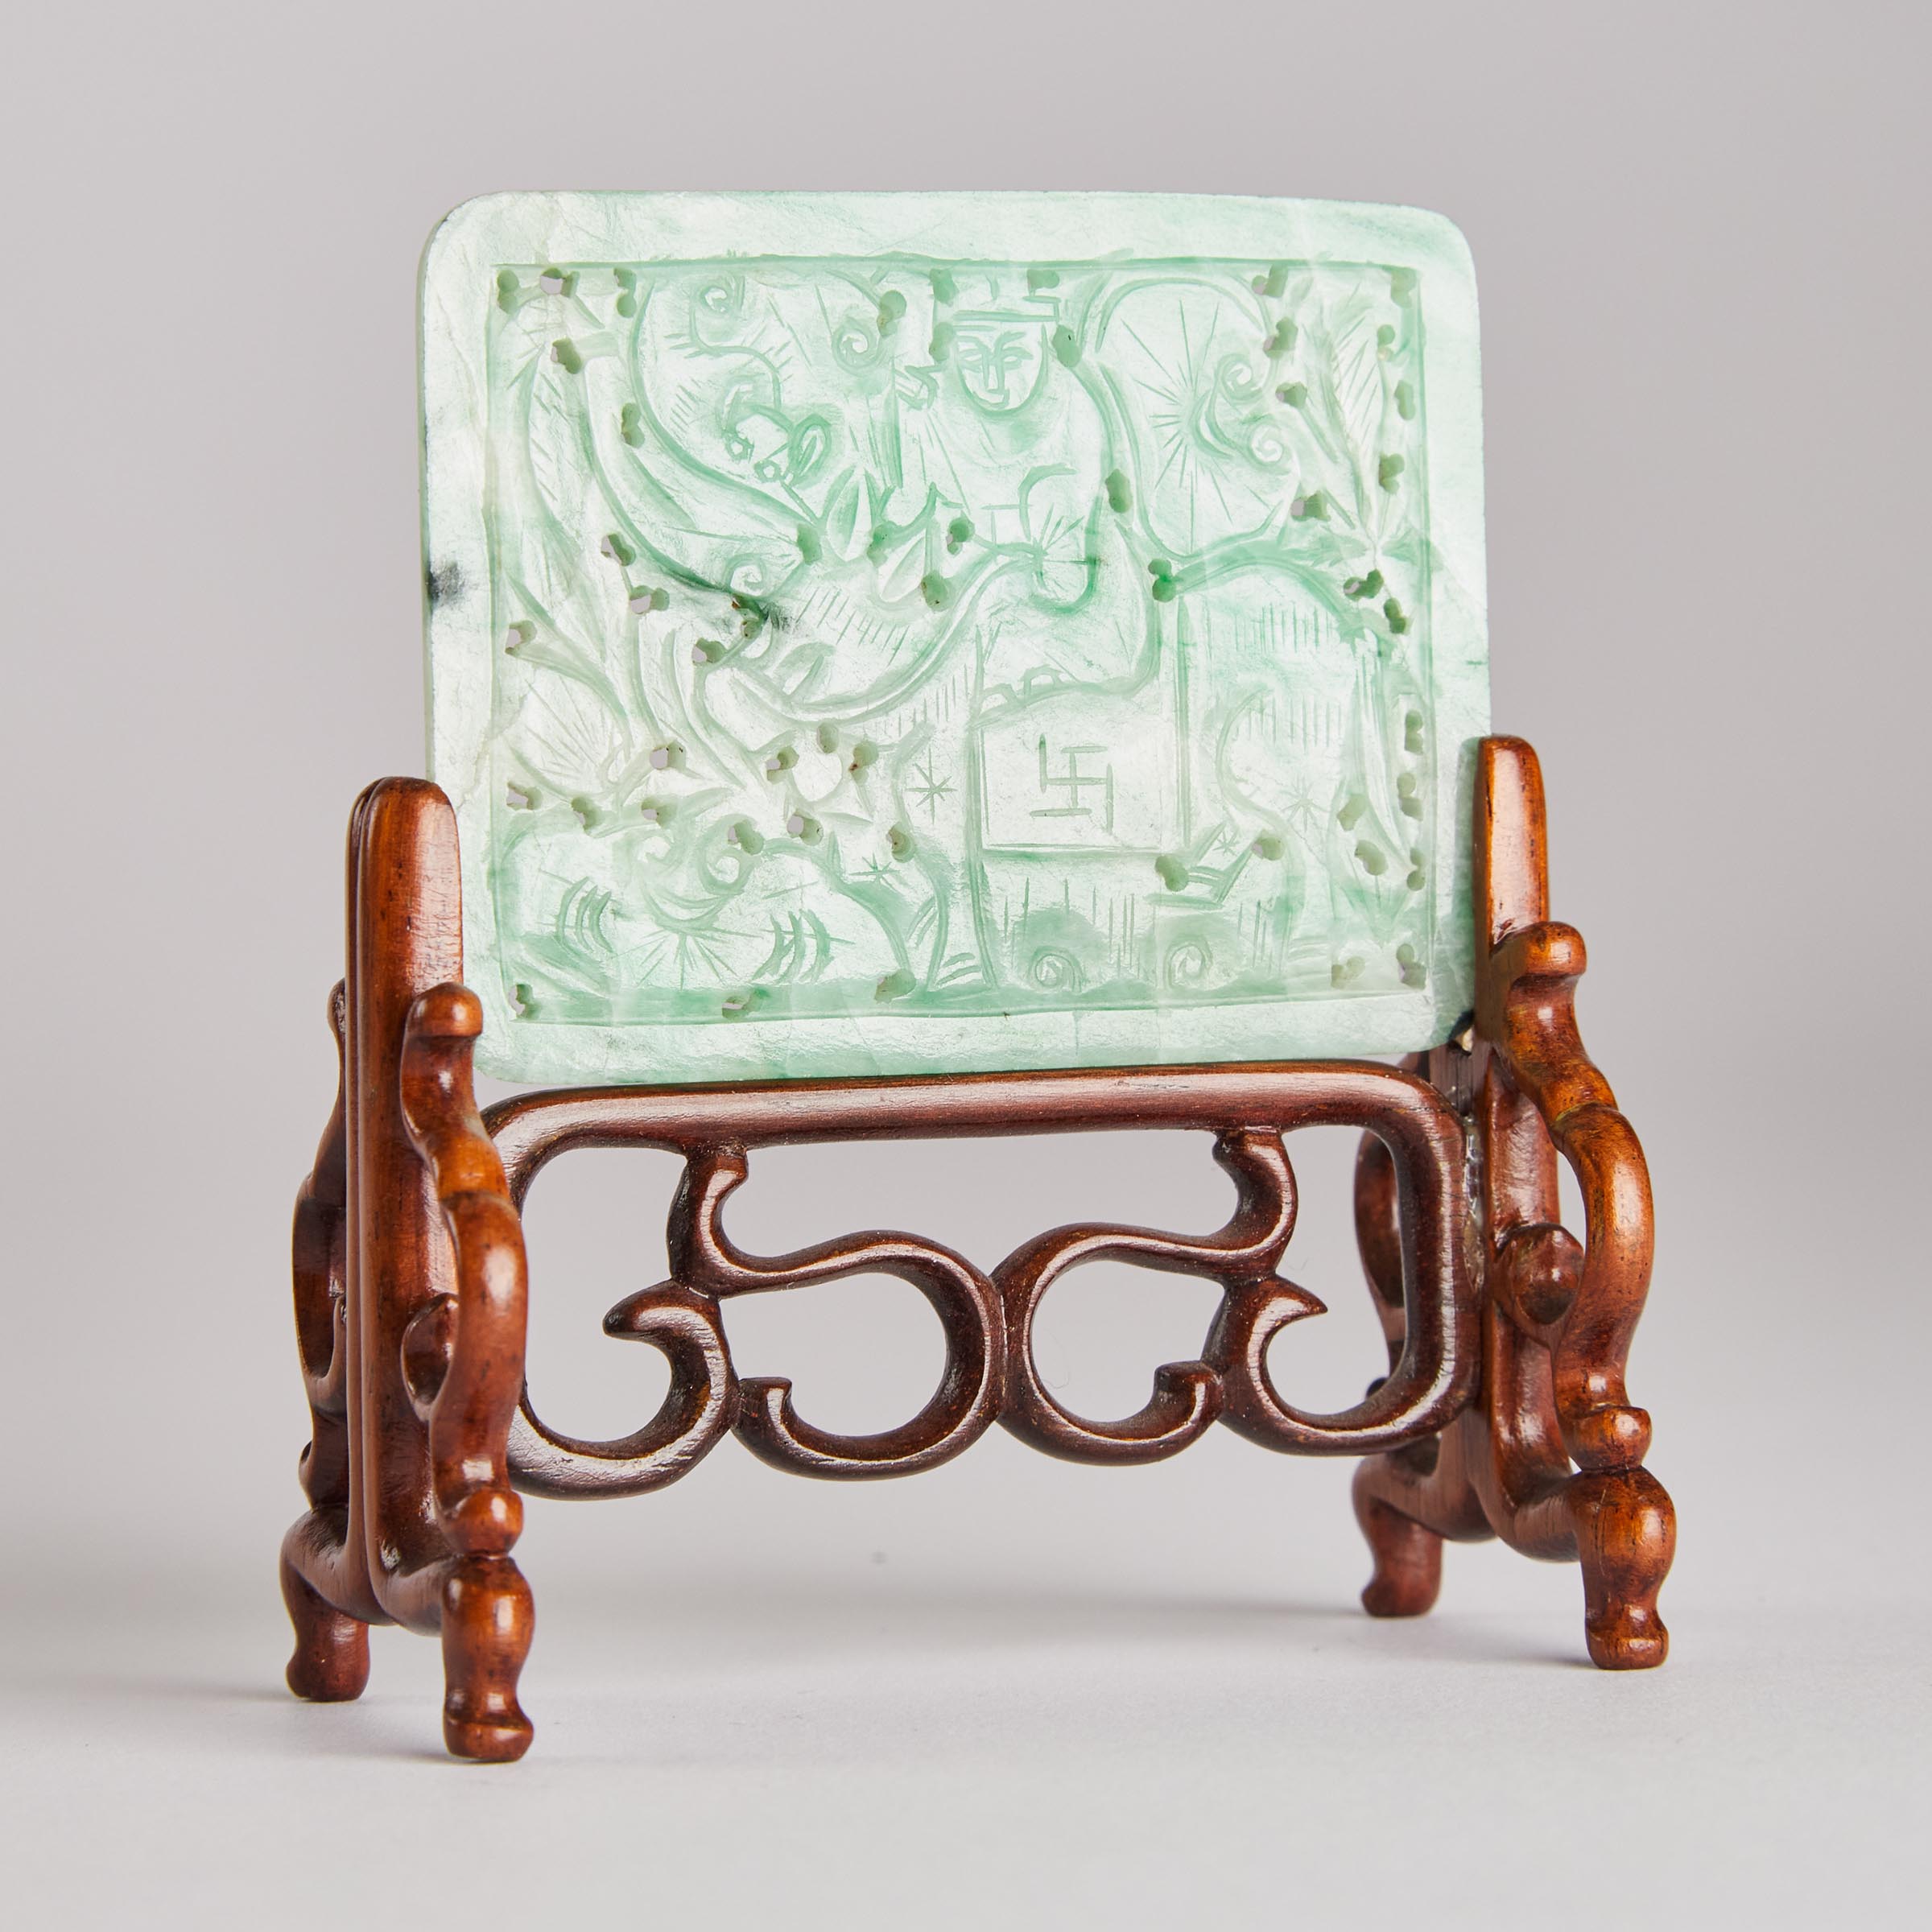 A Small Jadeite Carved Table Screen,